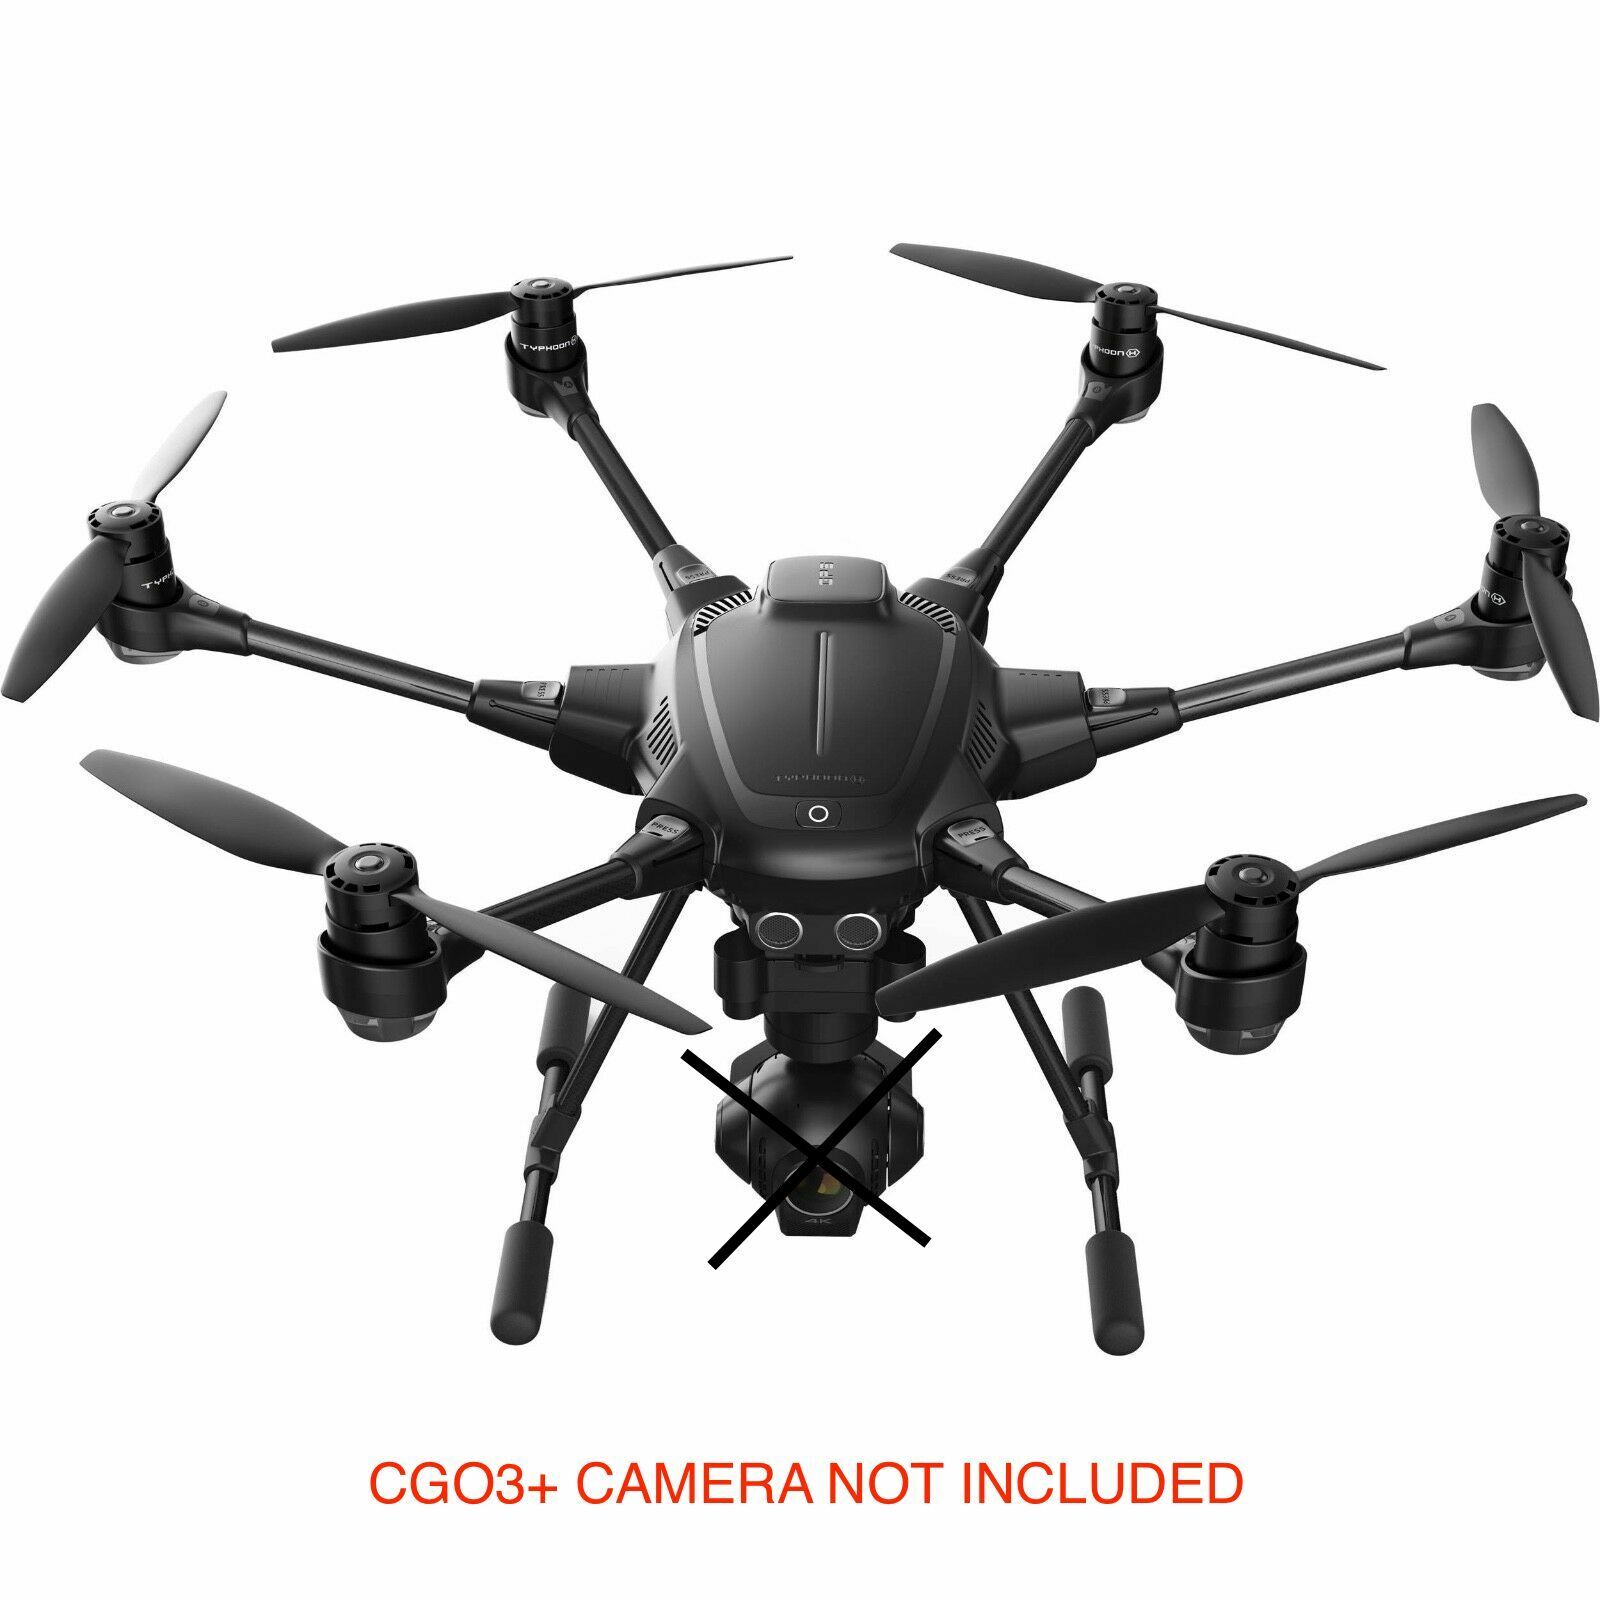 YUNEEC Typhoon H Hexacopter, ST16 - No Camera